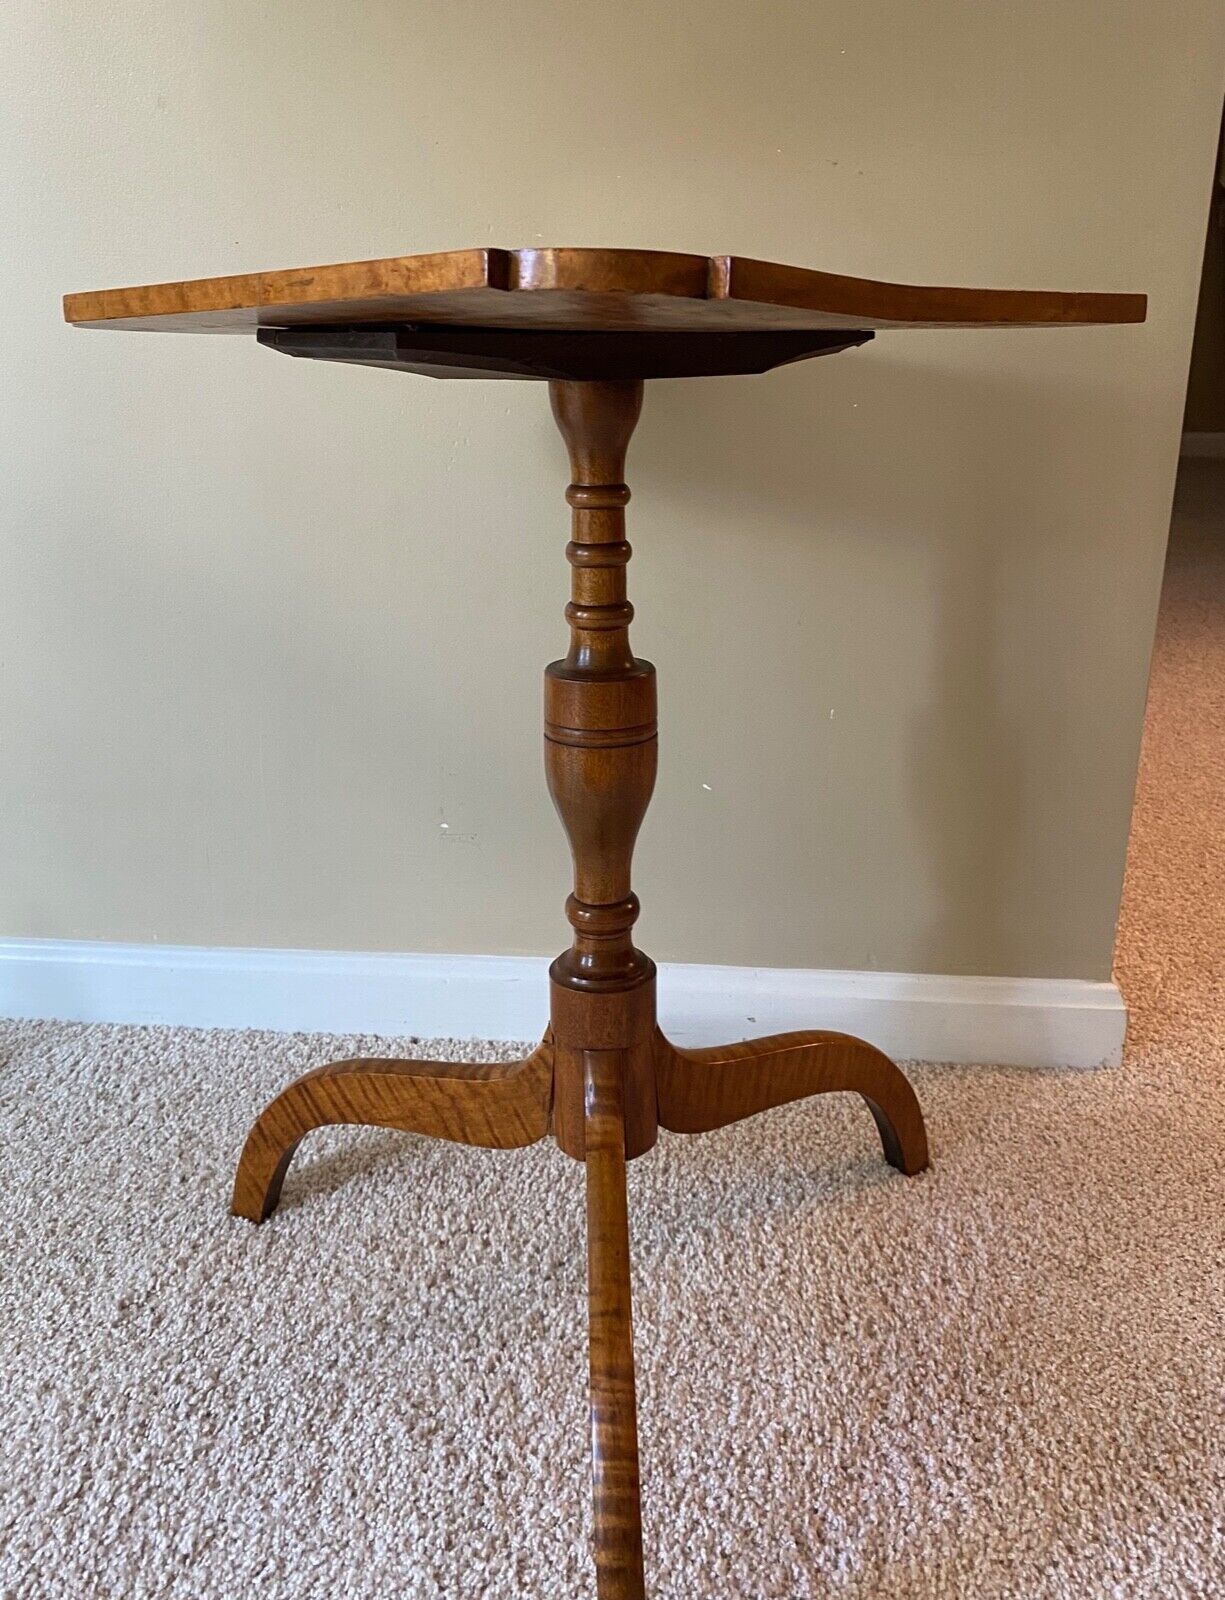 Antique Candle Stand Federal Furniture Curly Tiger Maple Table Colonial American